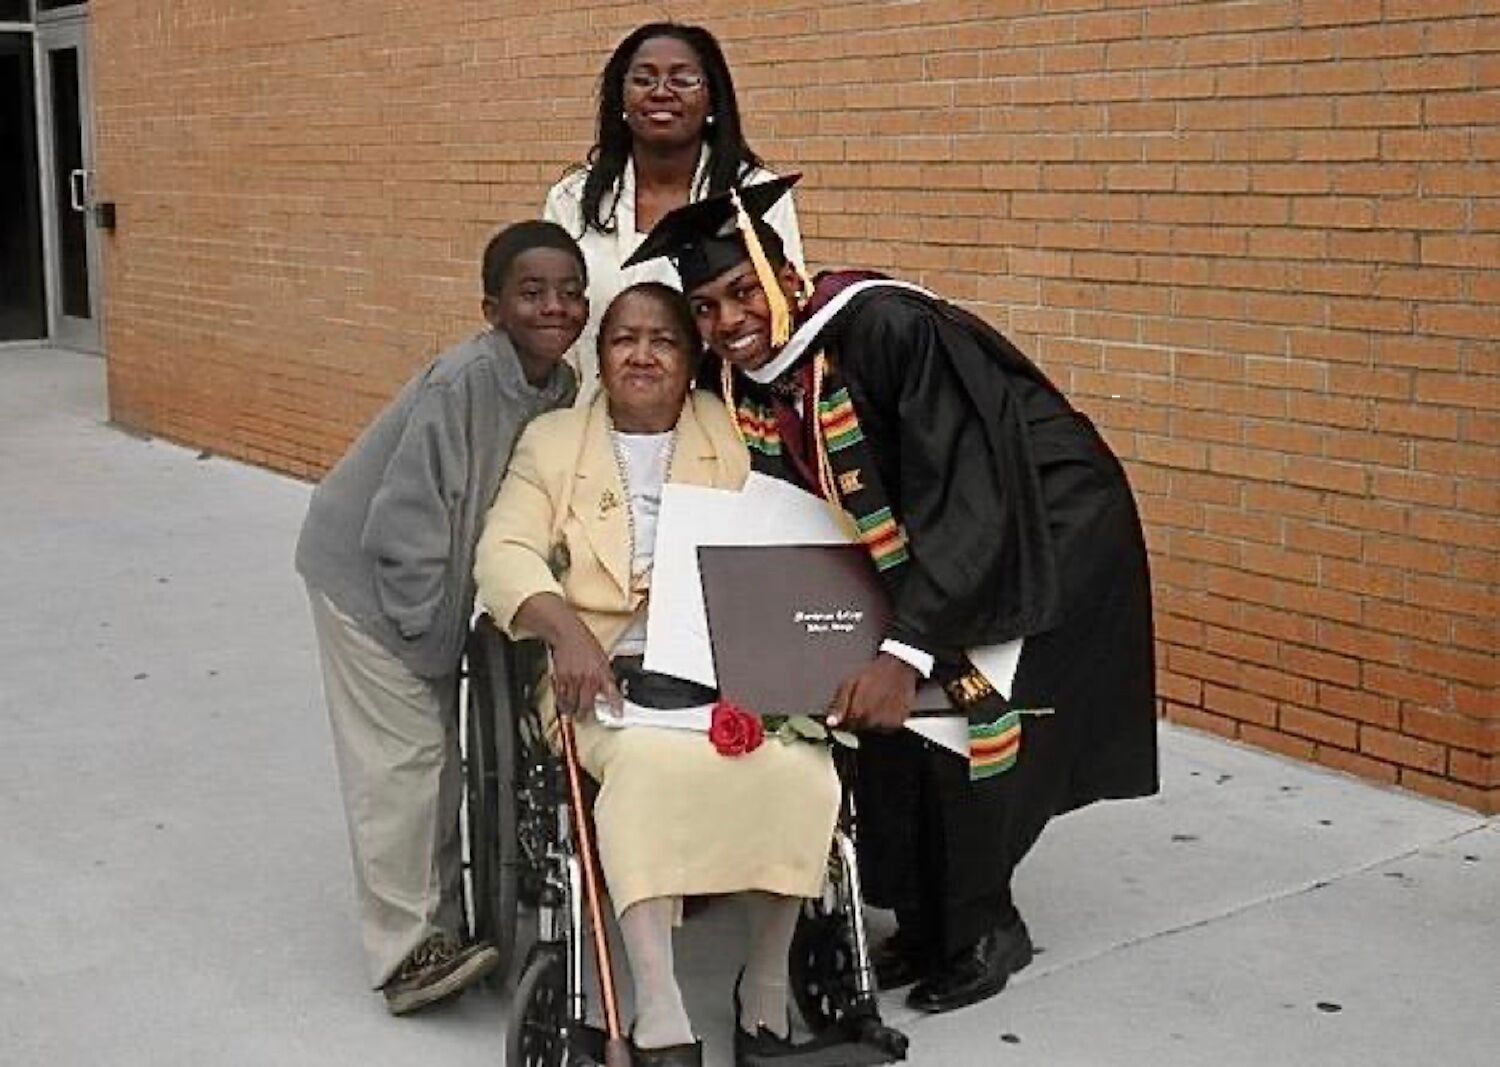 (clockwise from top) Mother Mariam LaTonya Alston-Greene, Brian Alston-Carter, grandmother Mary DeVaughn Lee-Alston (“Nana”), and youngest brother Tyler James Greene on graduation day from Morehouse College in Atlanta. Photo provided by Brian Alston-Carter